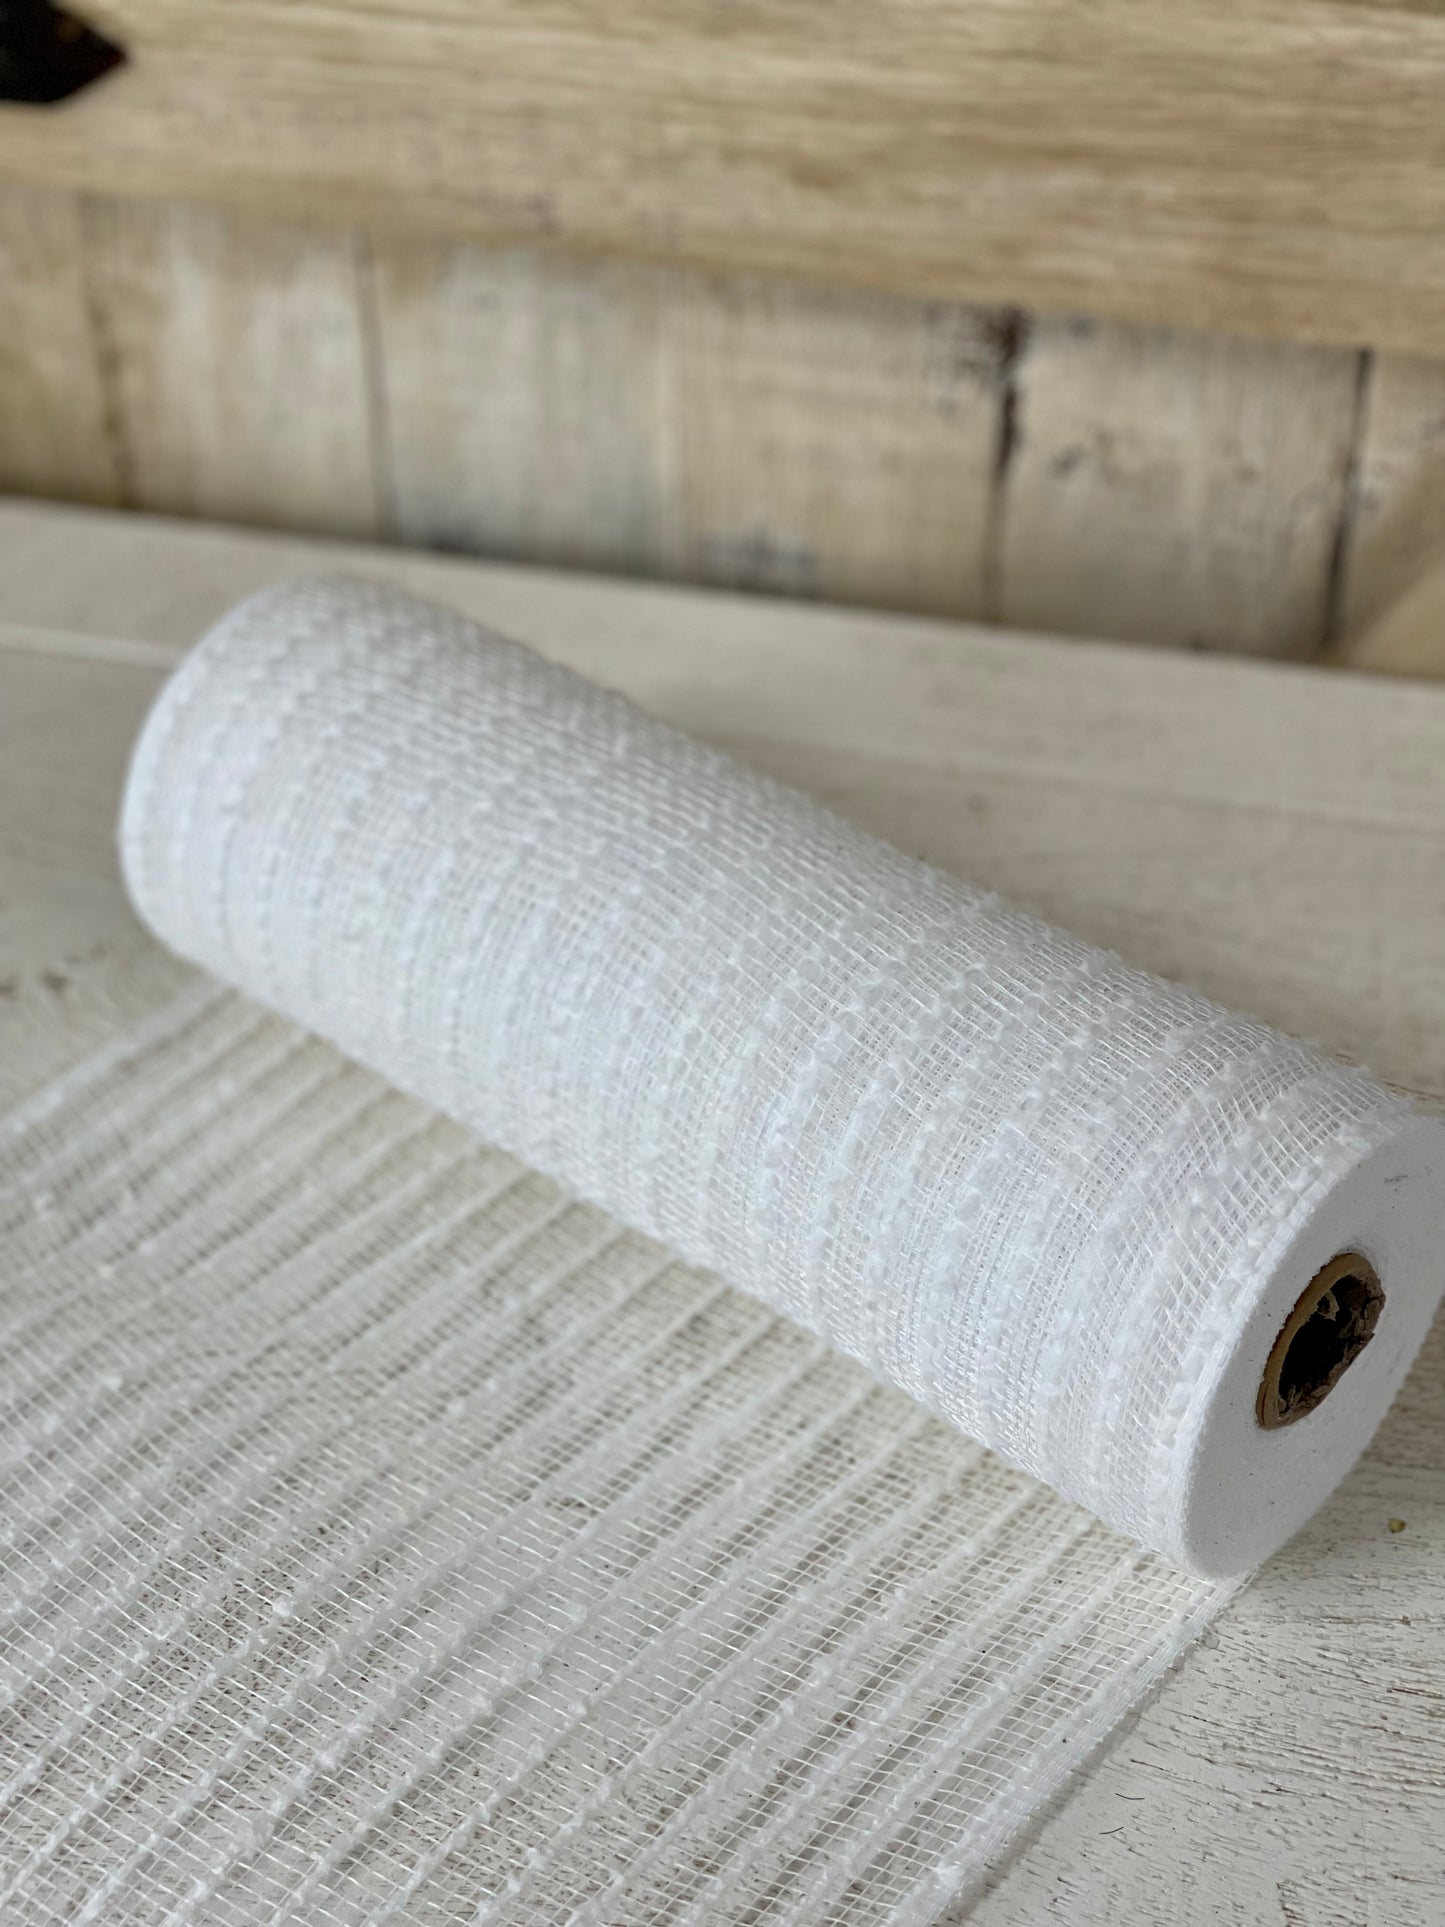 10.25 Inch By 10 Yard White Netting With Snowdrift